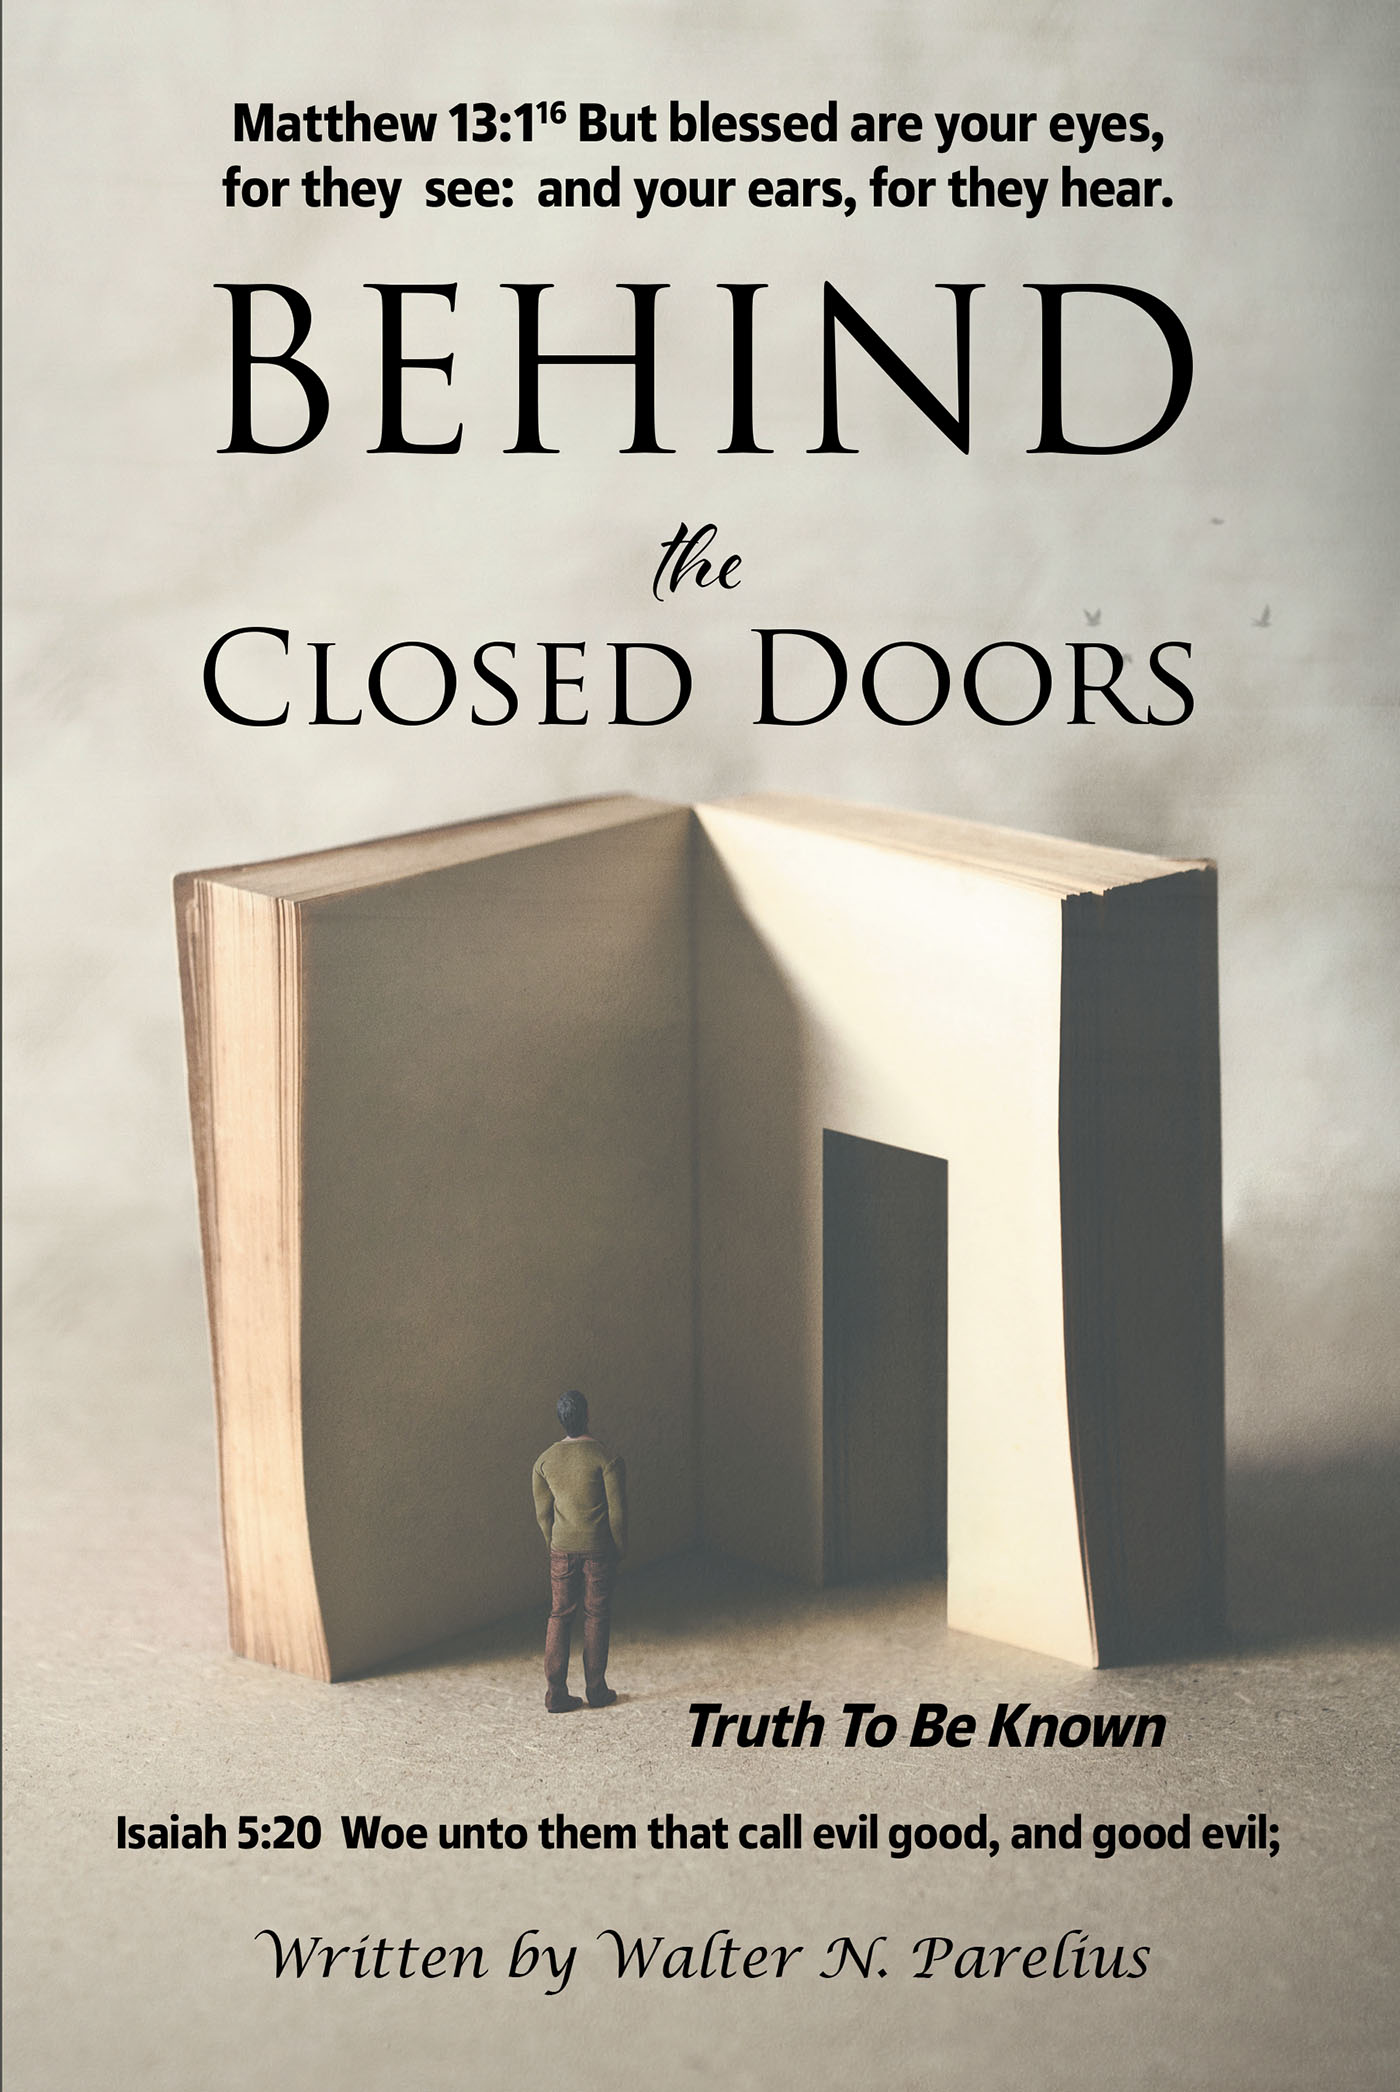 Walter N. Parelius’s Newly Released “Behind the Closed Doors: Truth To Be Known” is a Thought-Provoking Discussion of Prophecy